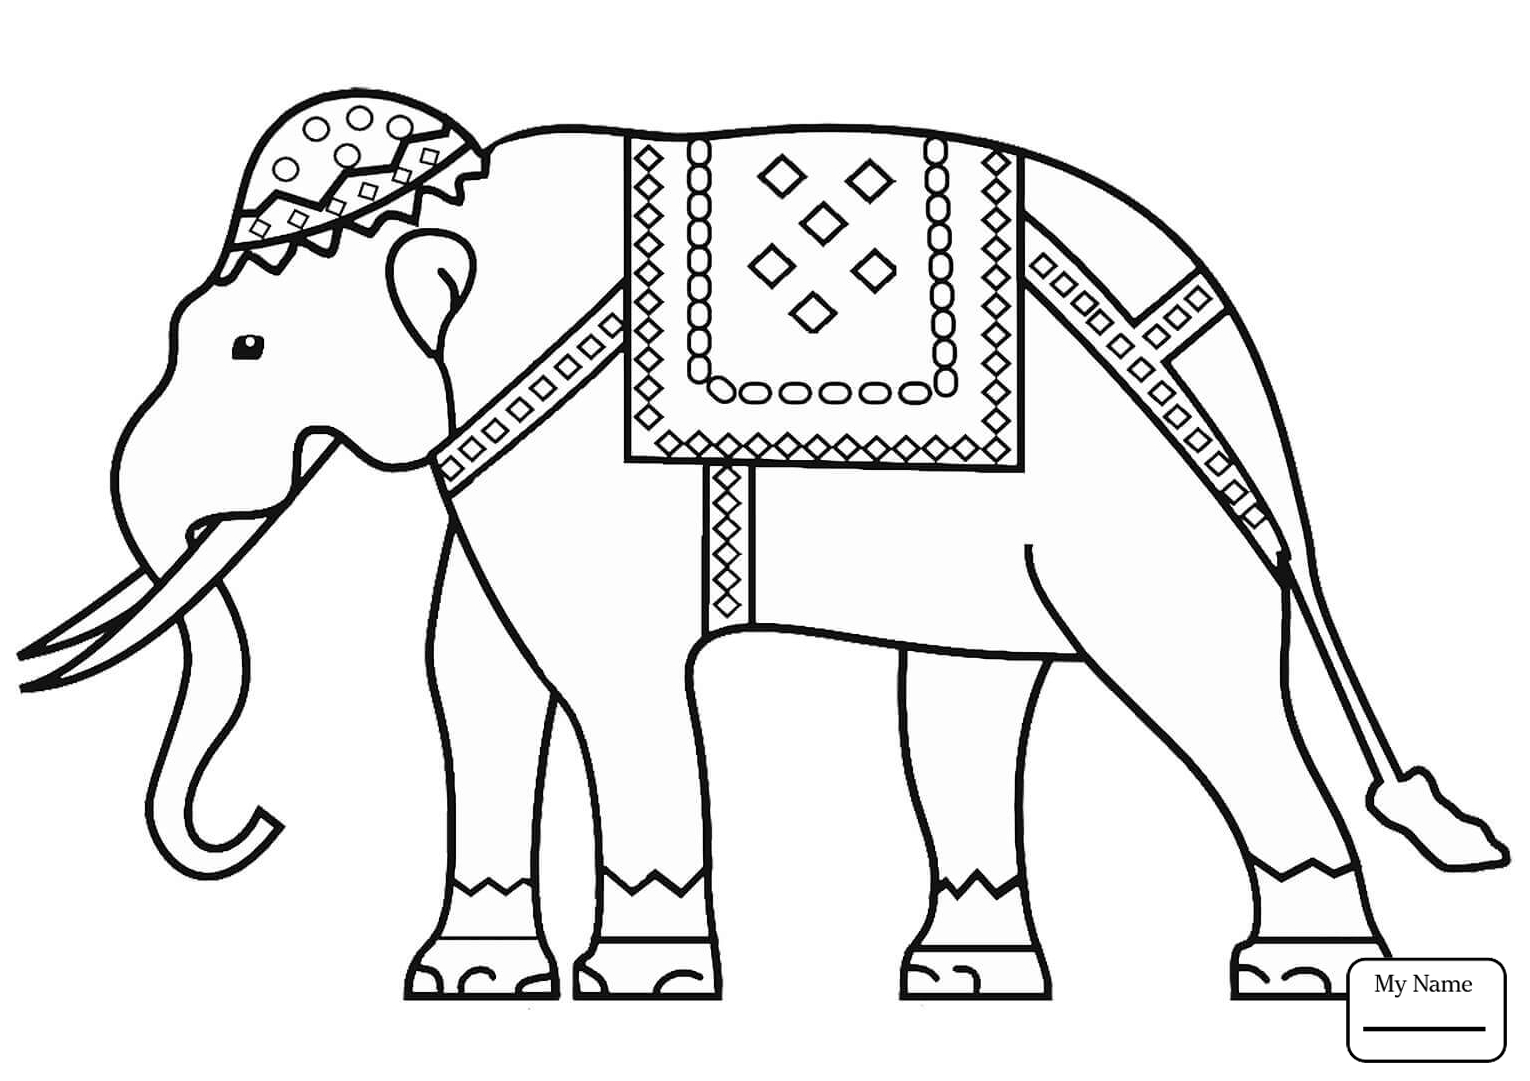 Nepal Coloring Pages at GetColoringscom Free printable